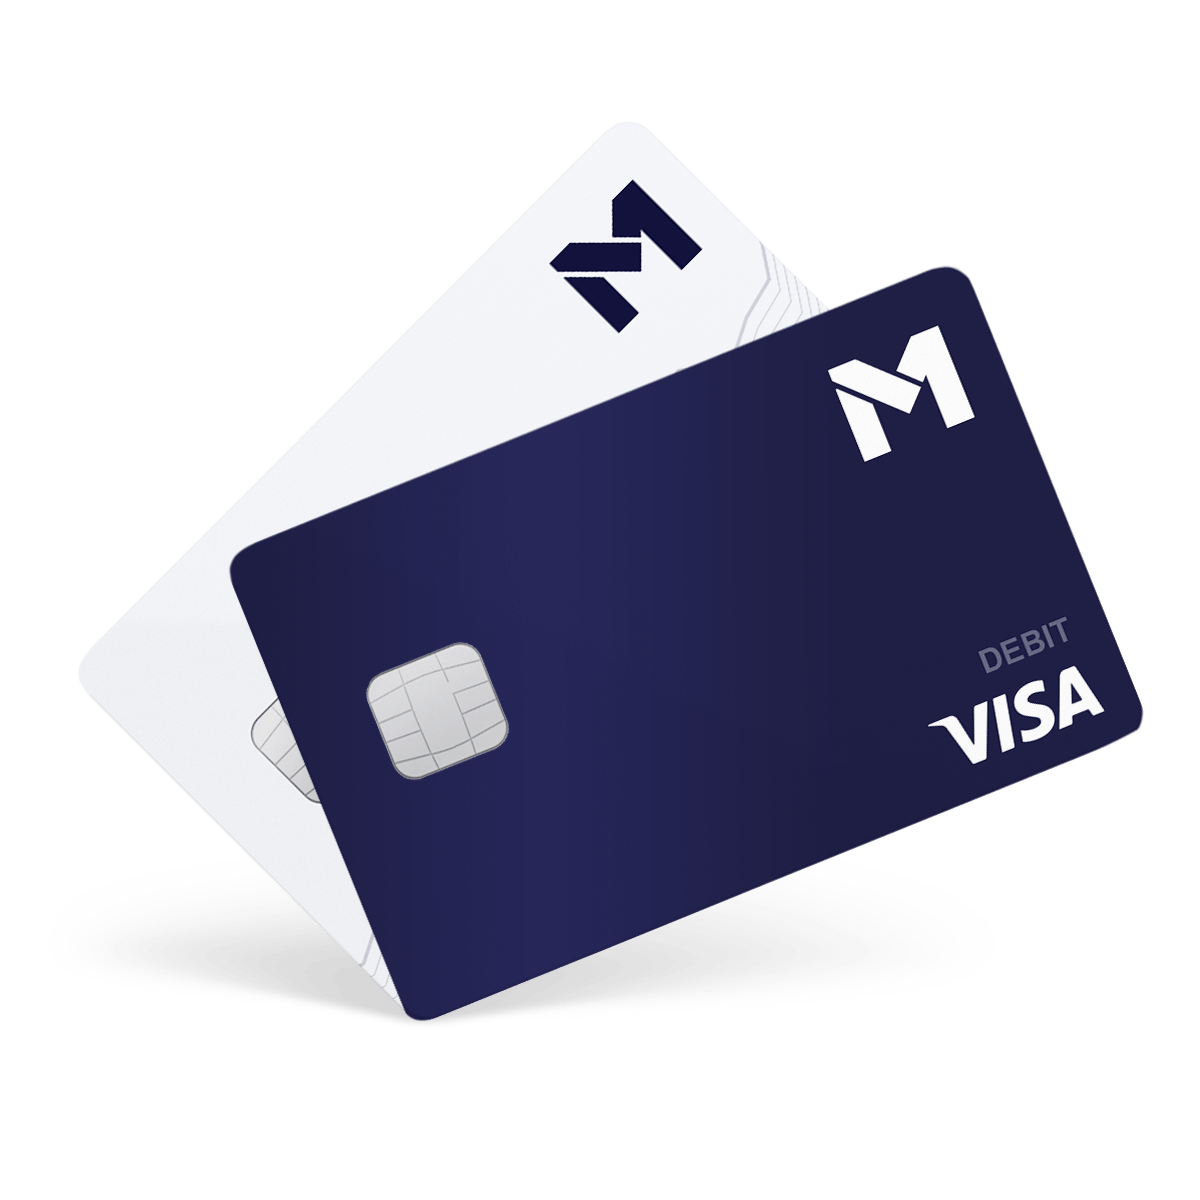 The M1 Spend checking account comes in two tiers: Basic and M1 Plus.